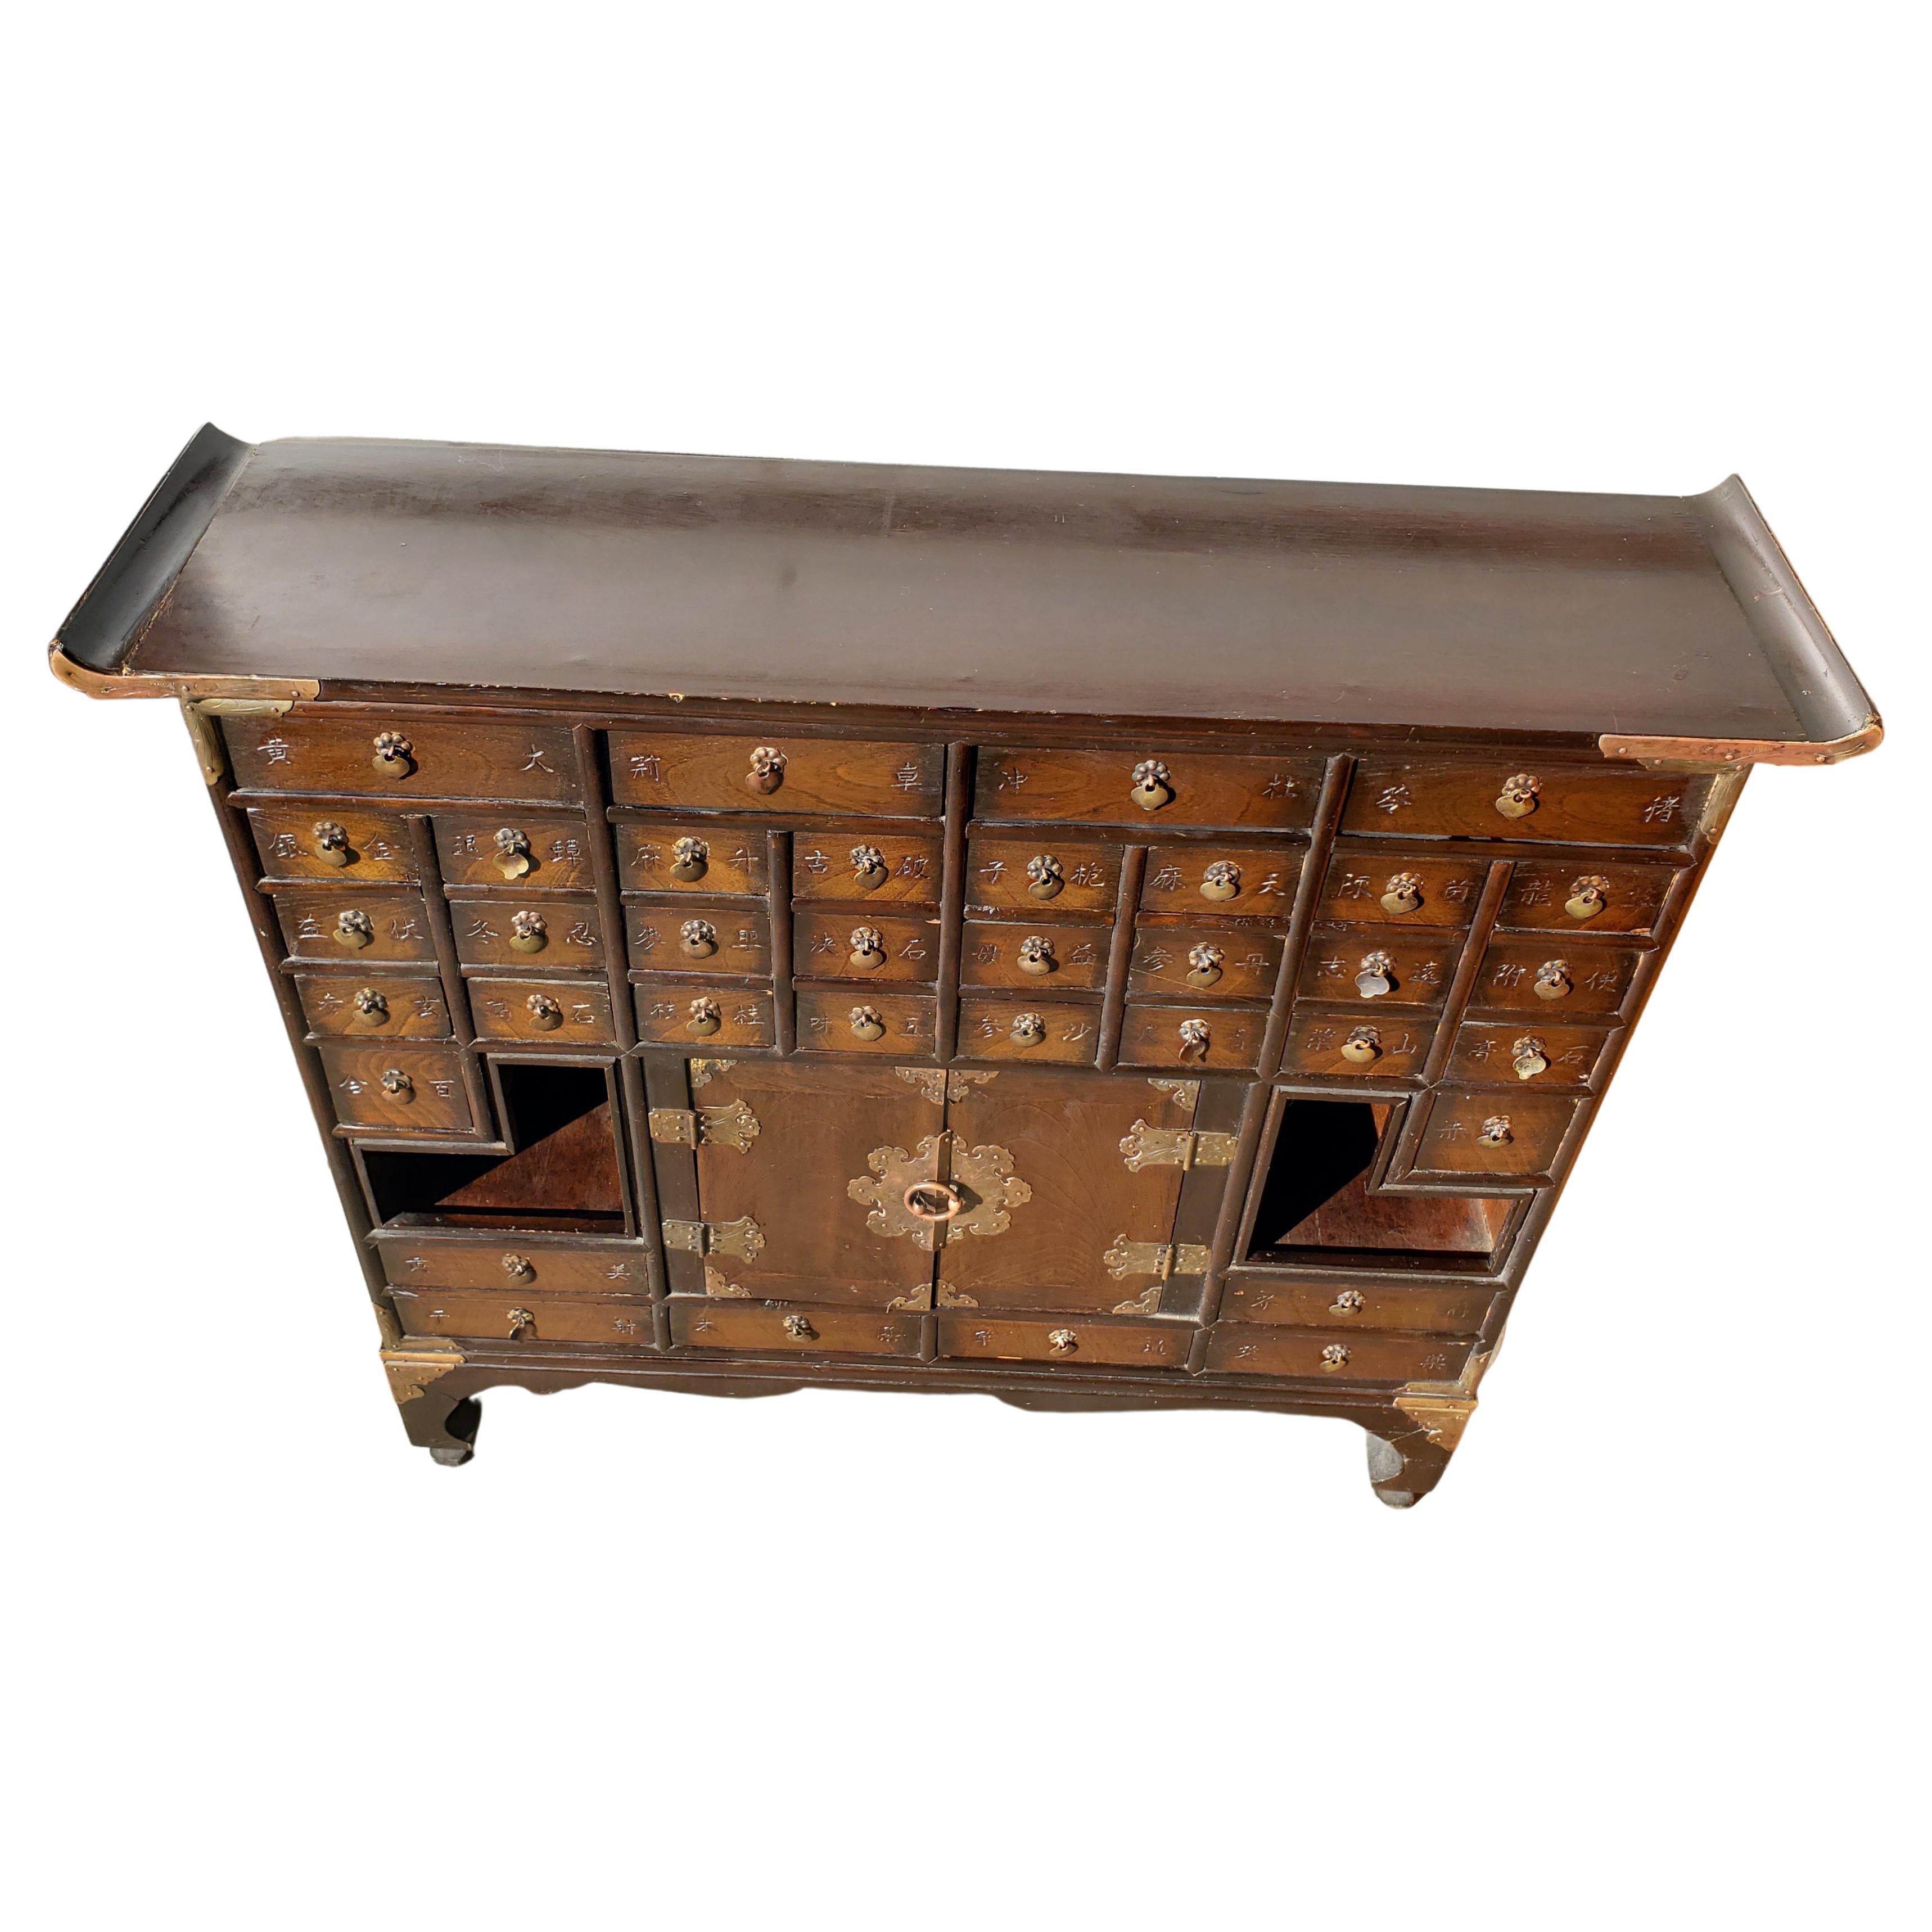 Authentic east Asian herbal medicine chest hand crafted in a classic Korean / Japanese antique design, with 36 miniature drawers, traditionally used for medicinal powders, minerals, roots and herbs. Finished in a richly grained dark stained Elmwood